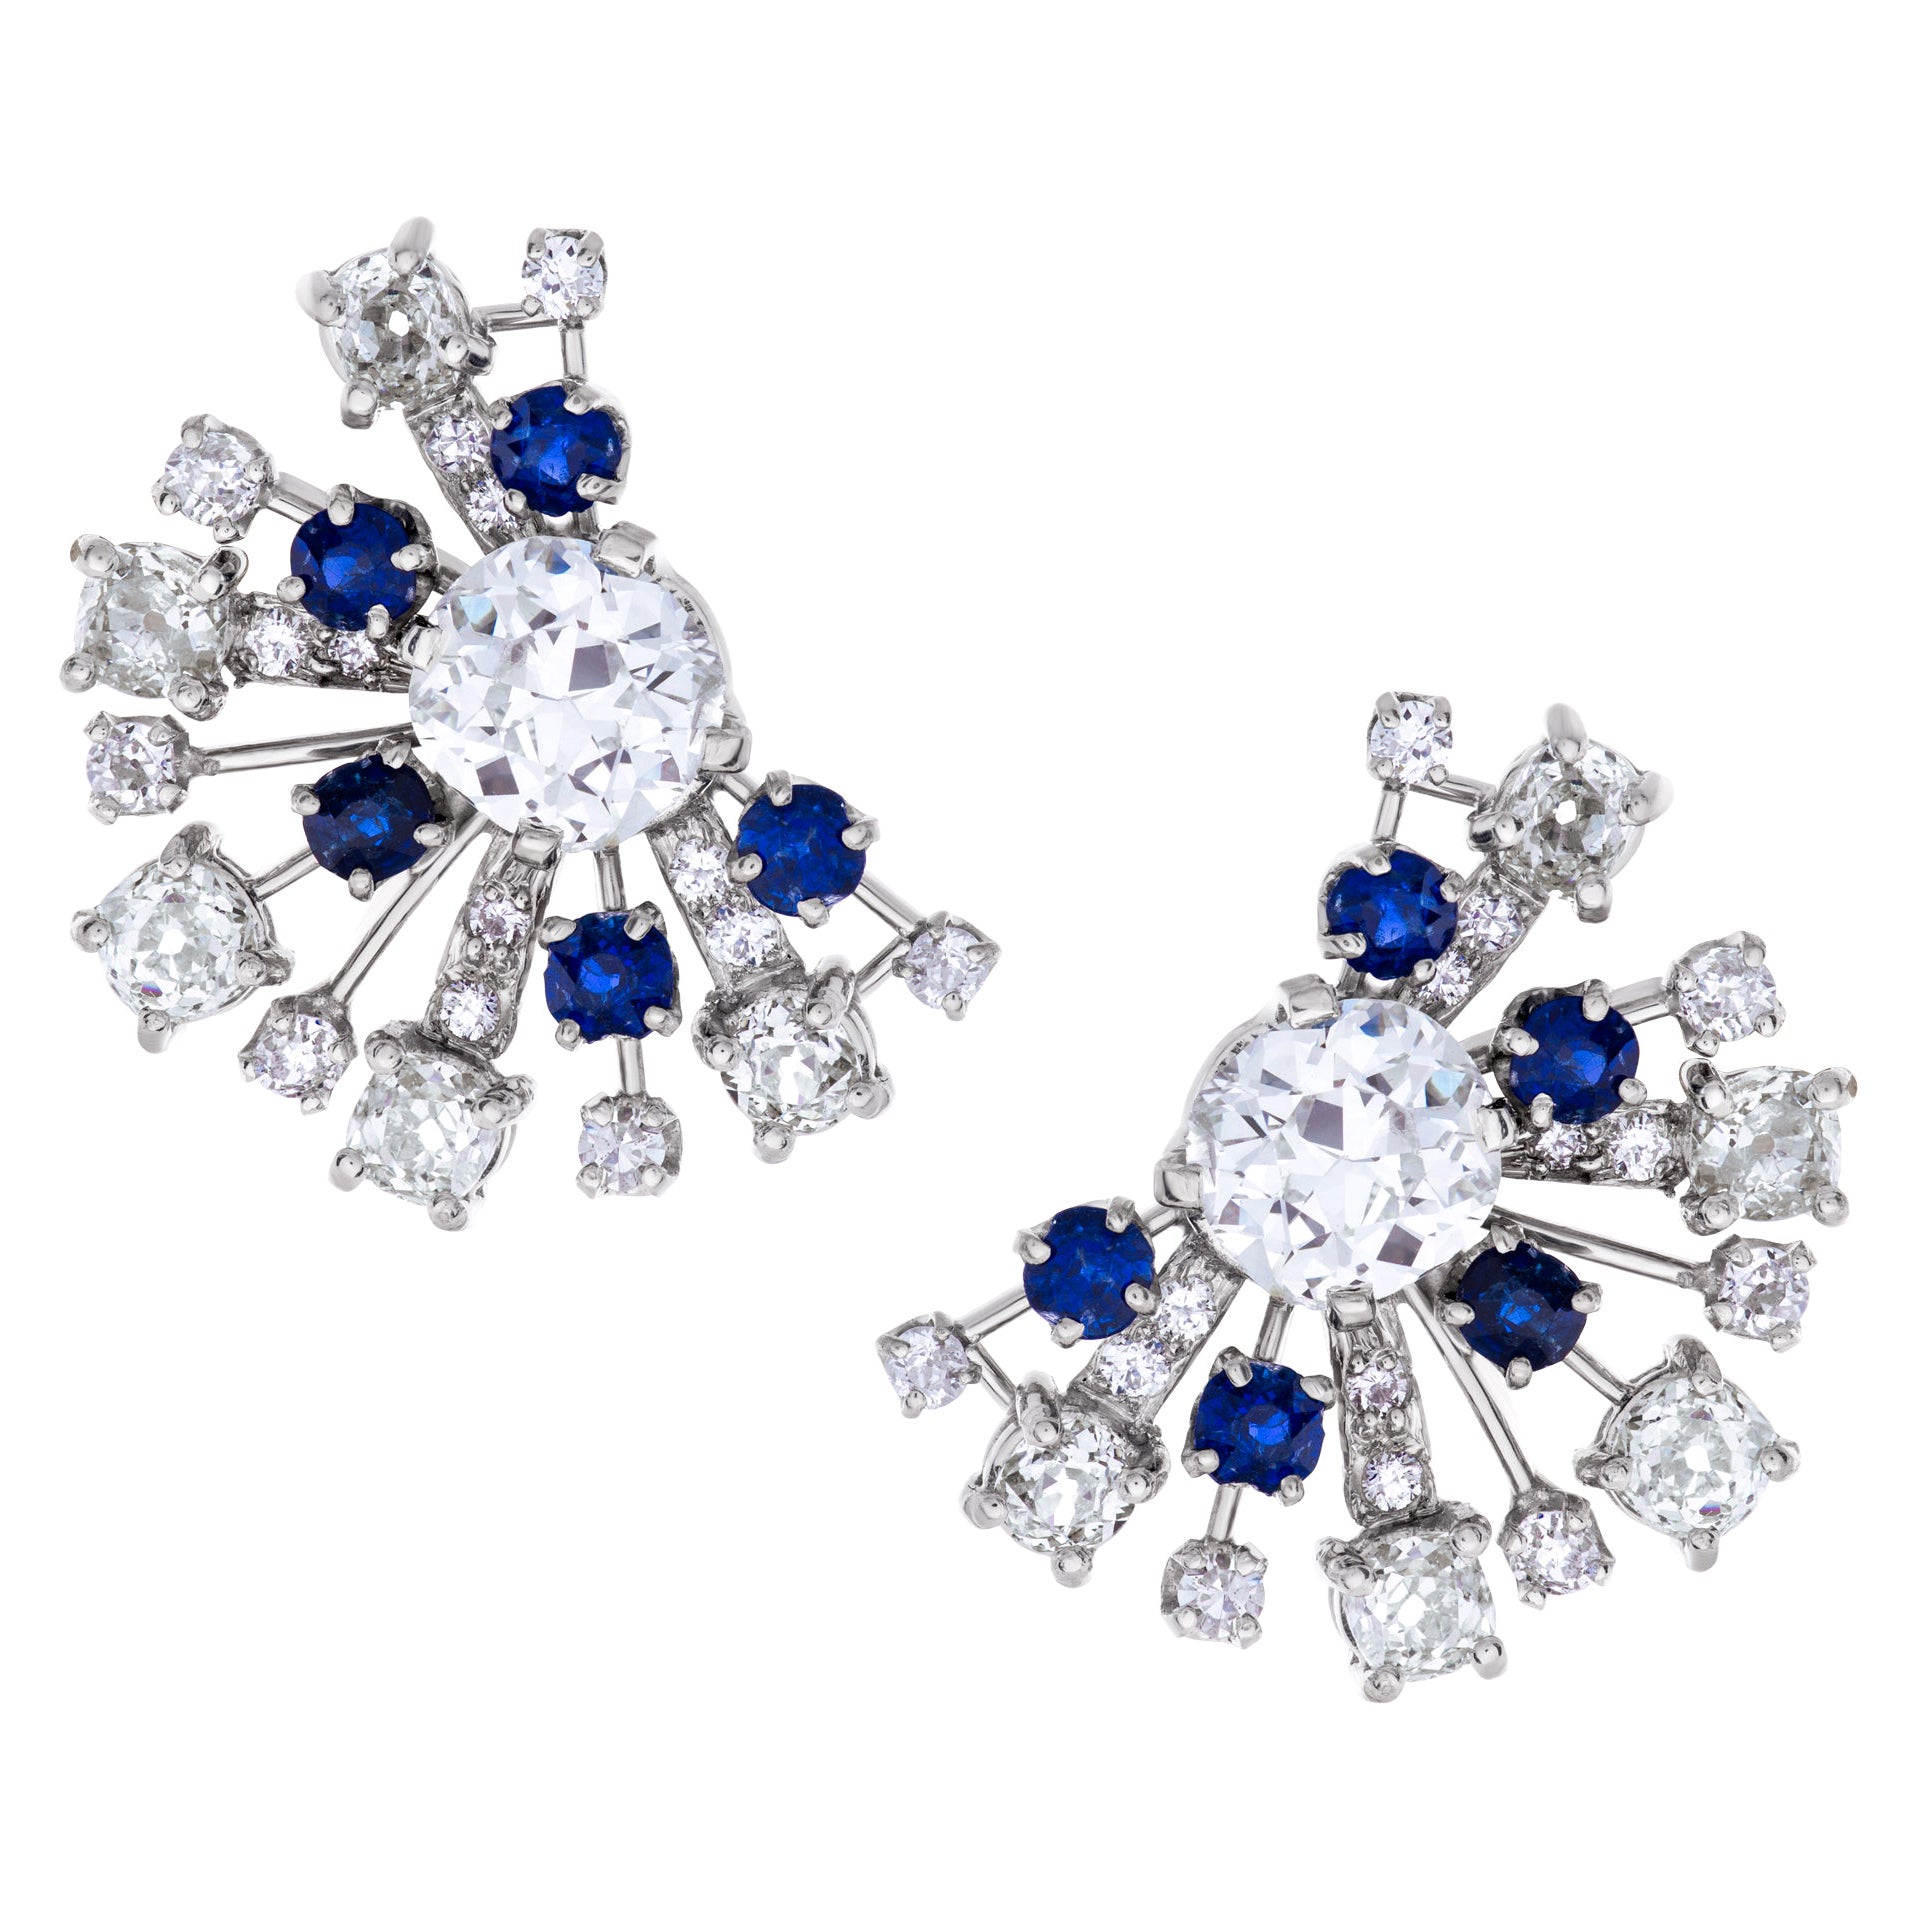 GIA Certified Cushion Brilliant Diamonds and Fan Sapphire Earrings in Platinum